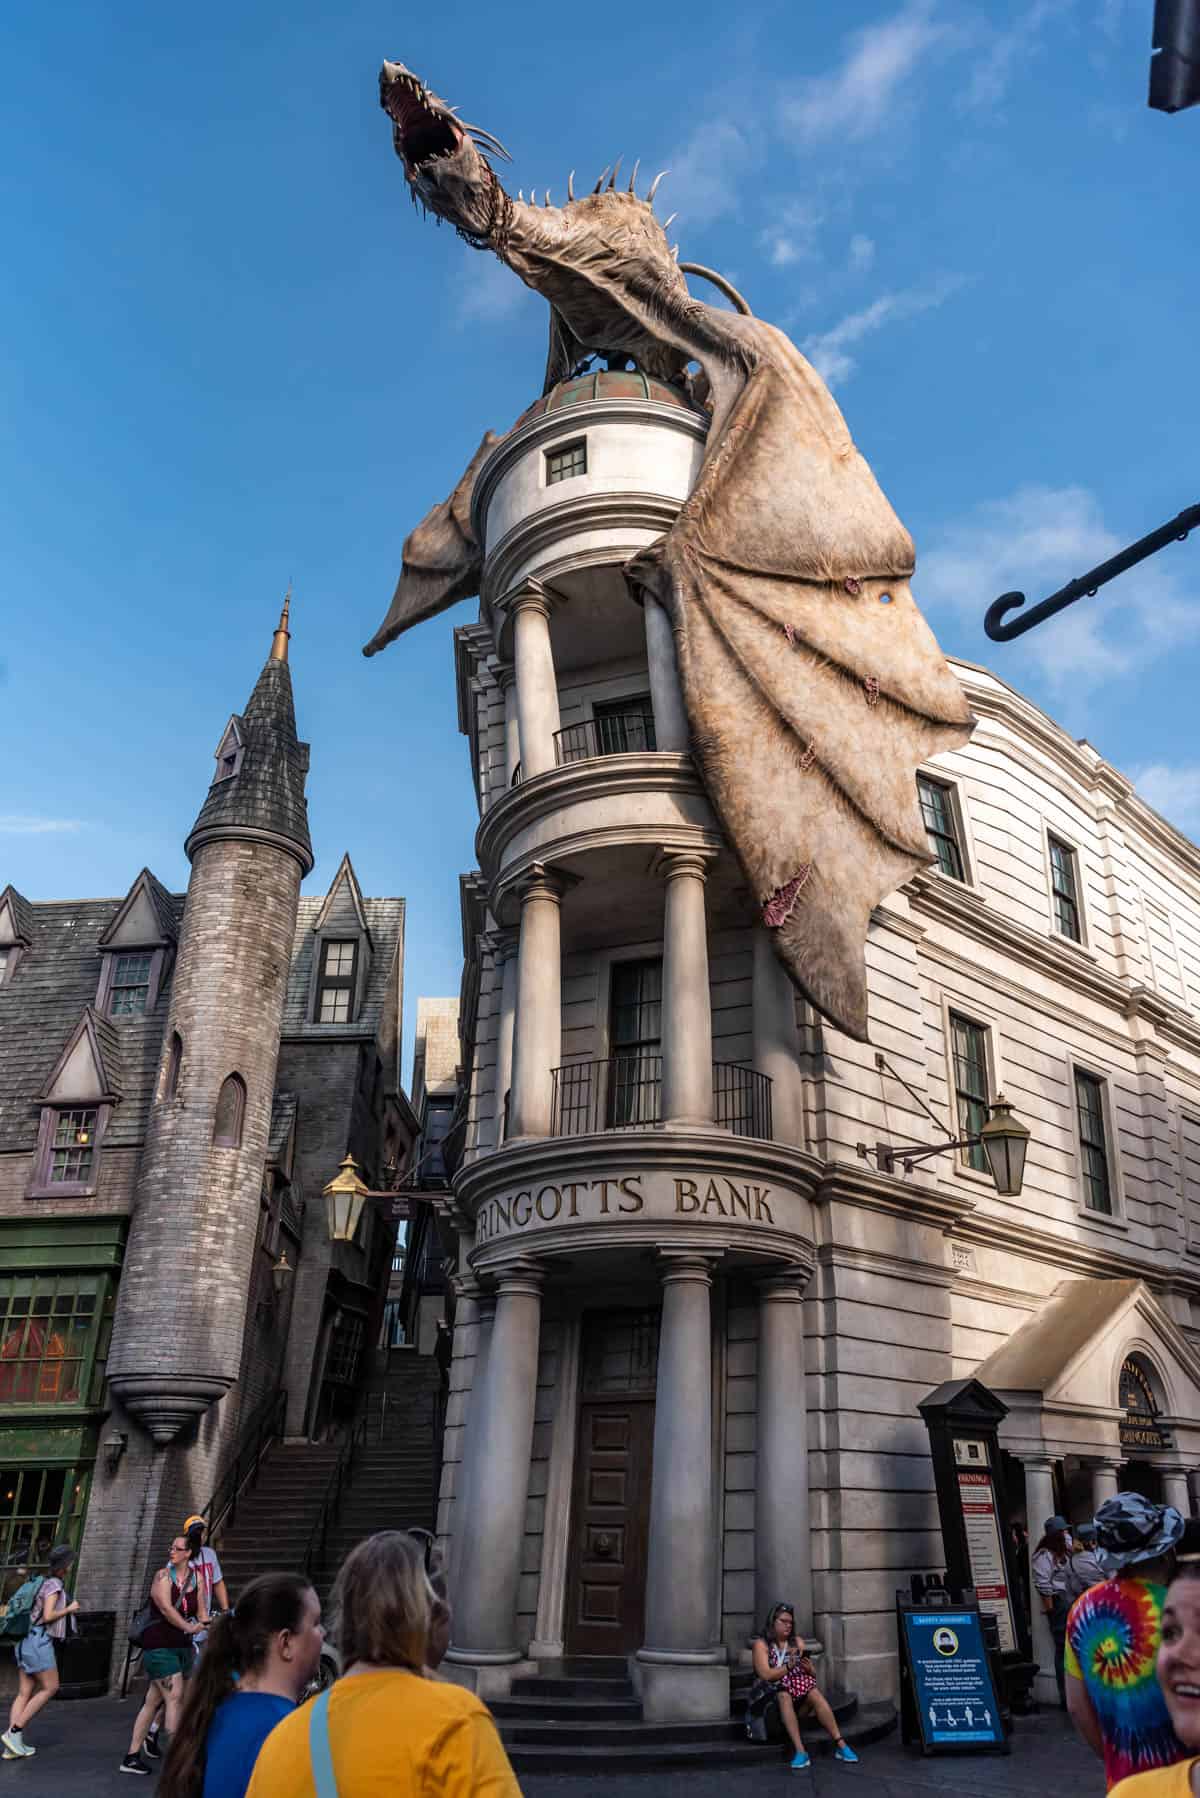 An image of the dragon on Gringott's bank.